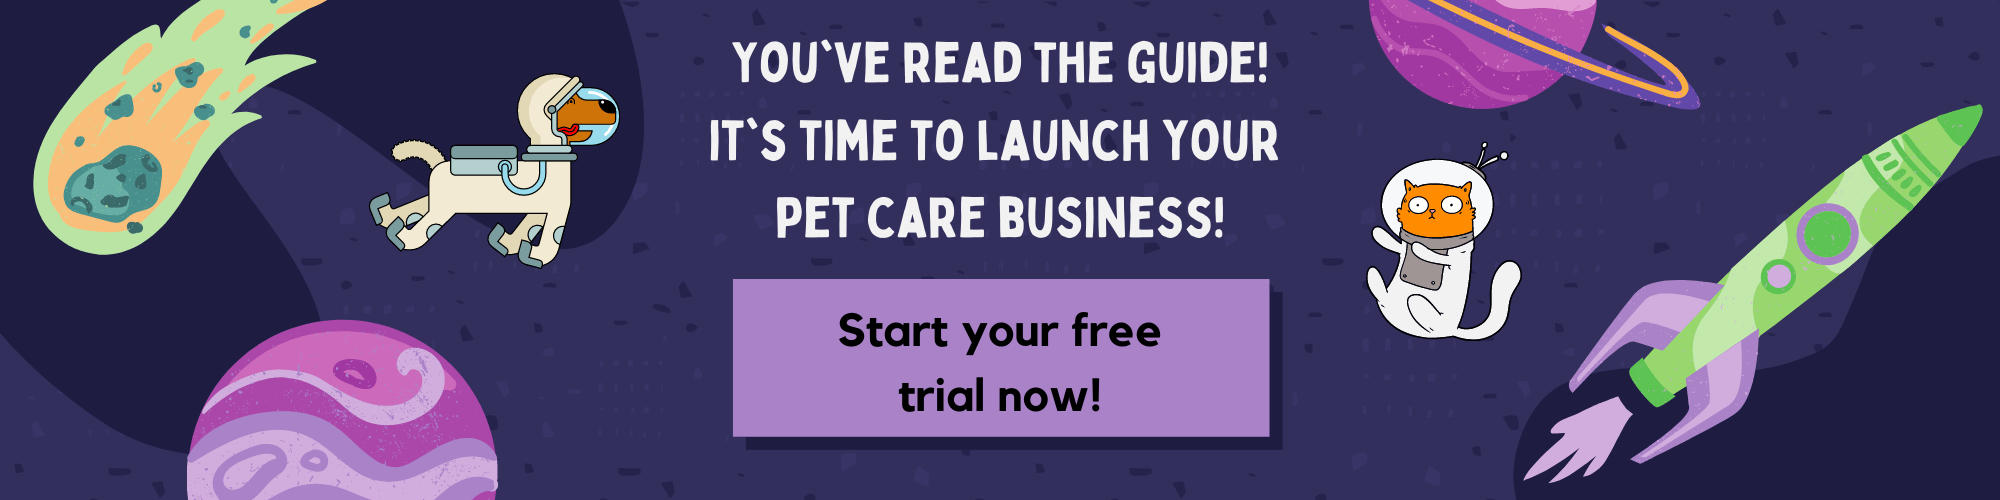 Free-Trial-CTA-how-to-start-a-dog-walking-business